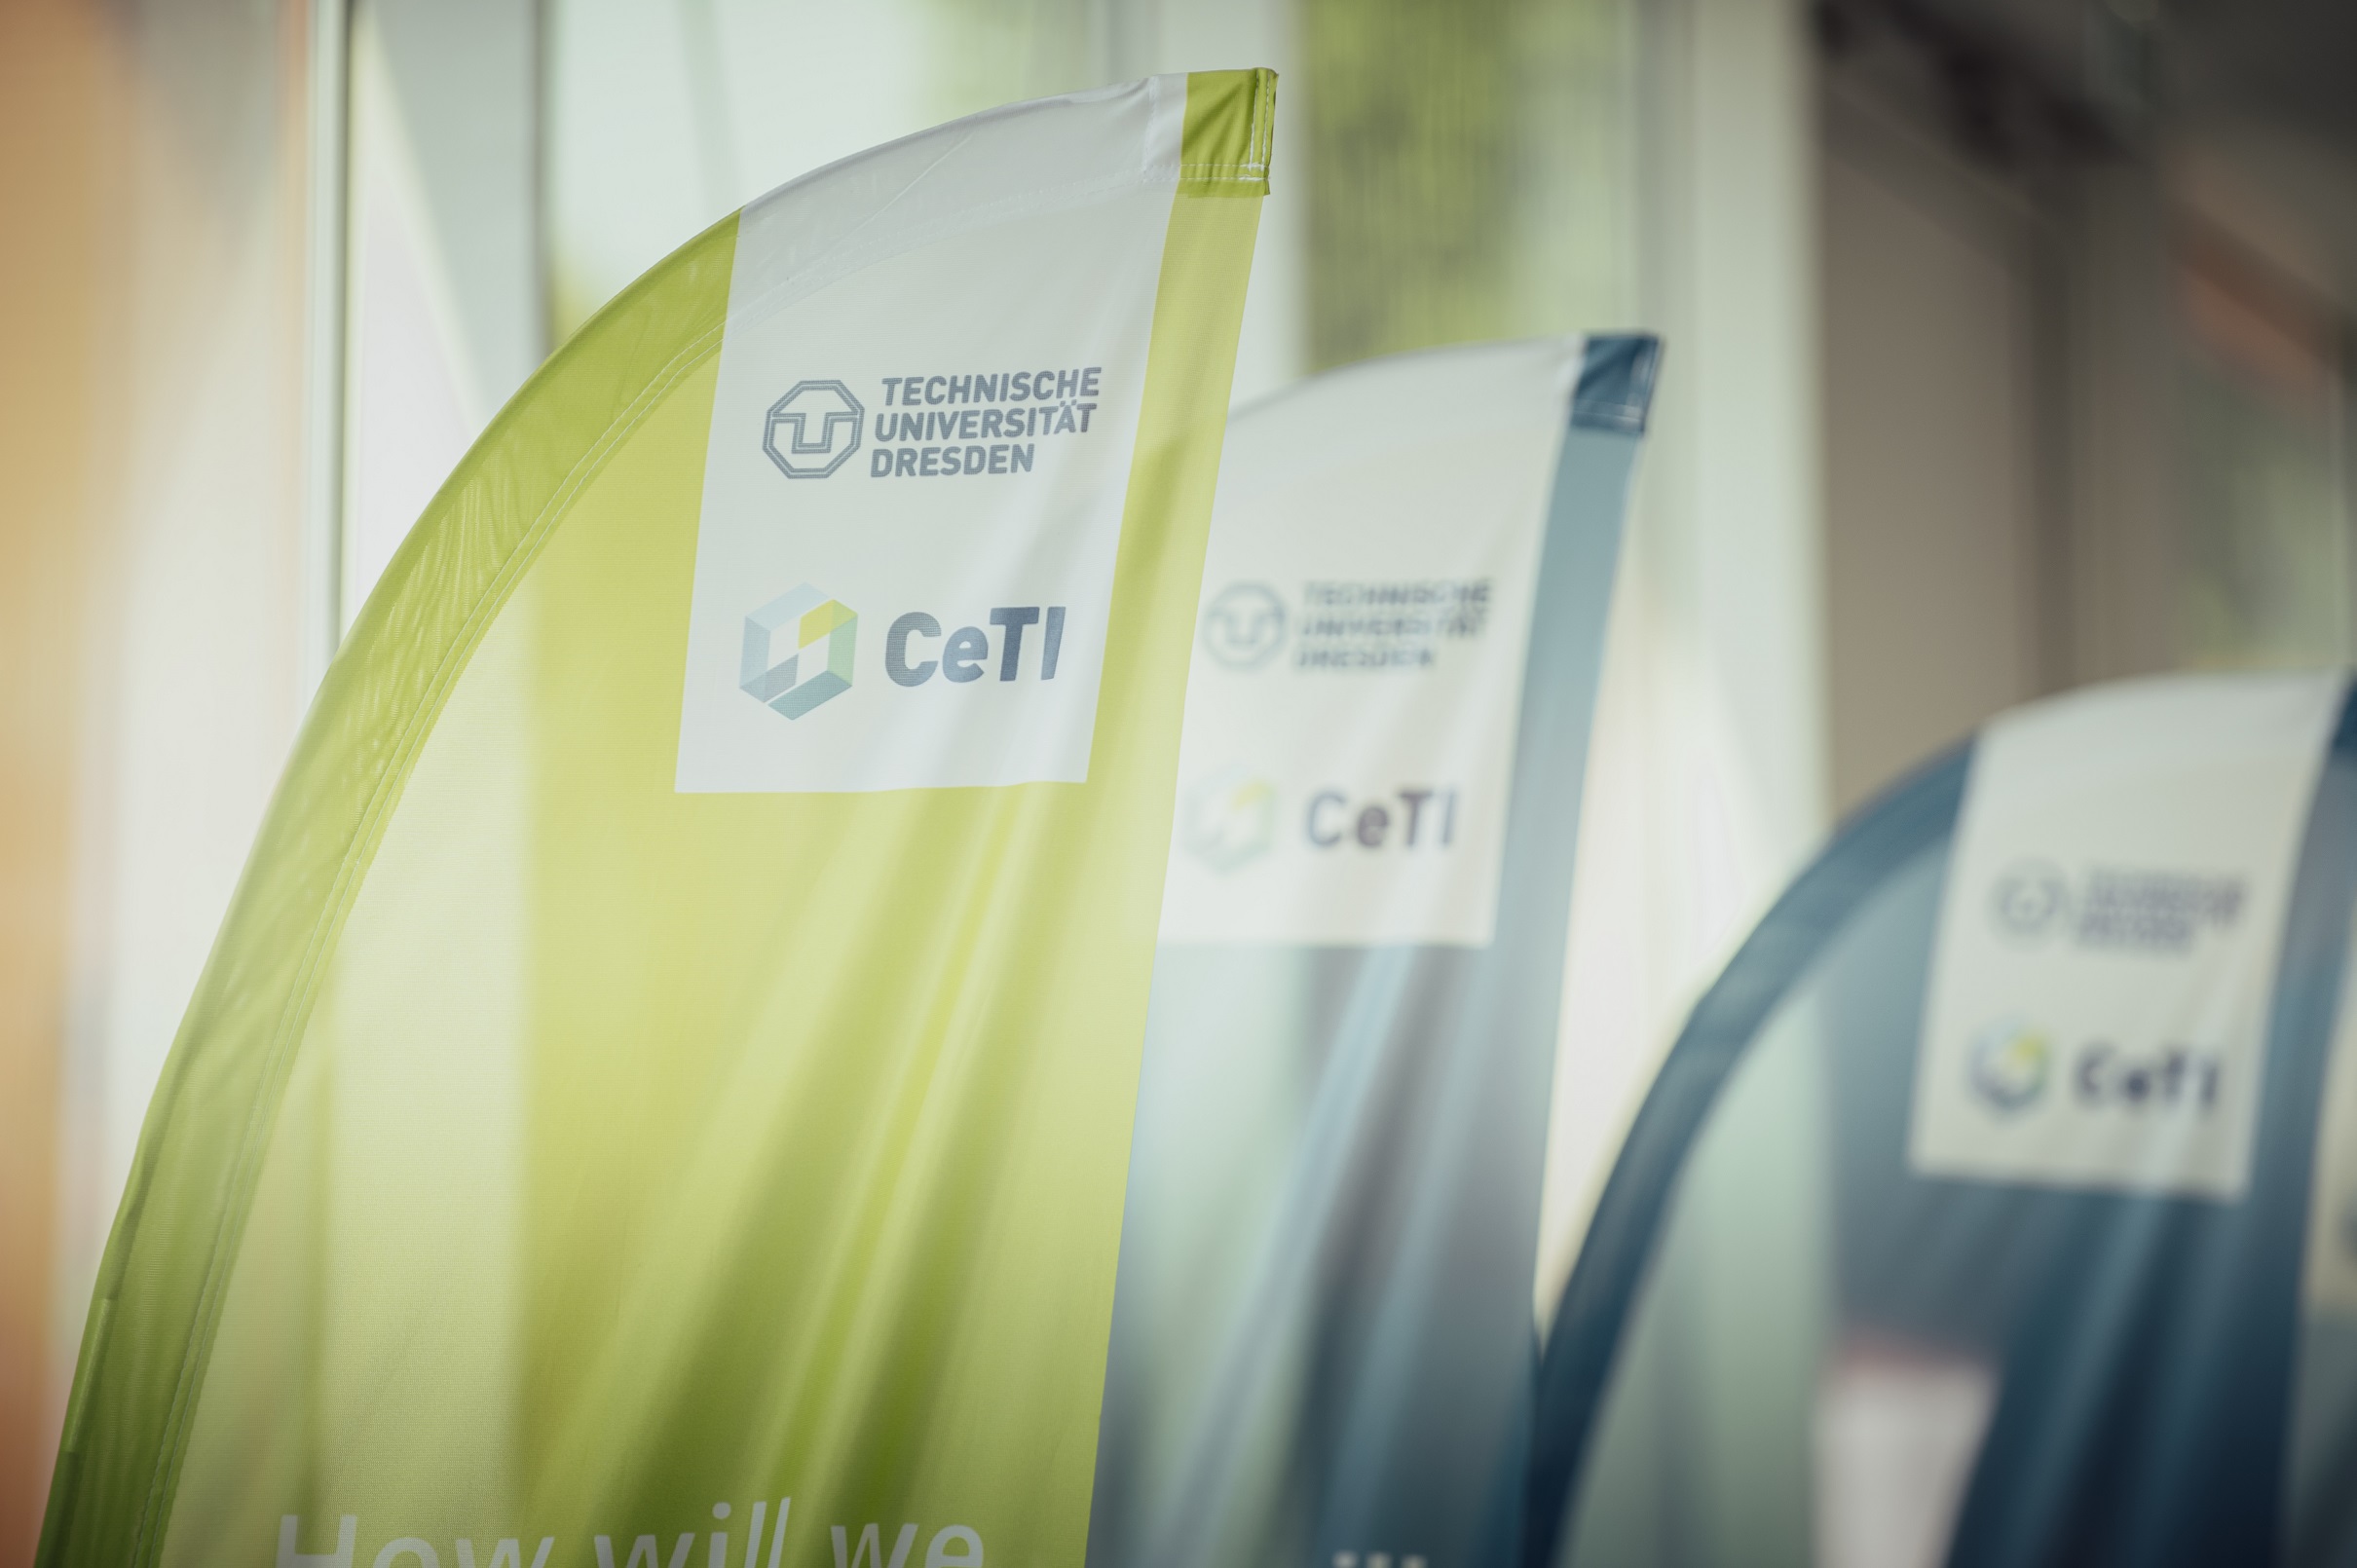 Photograph of three CeTI flag banners